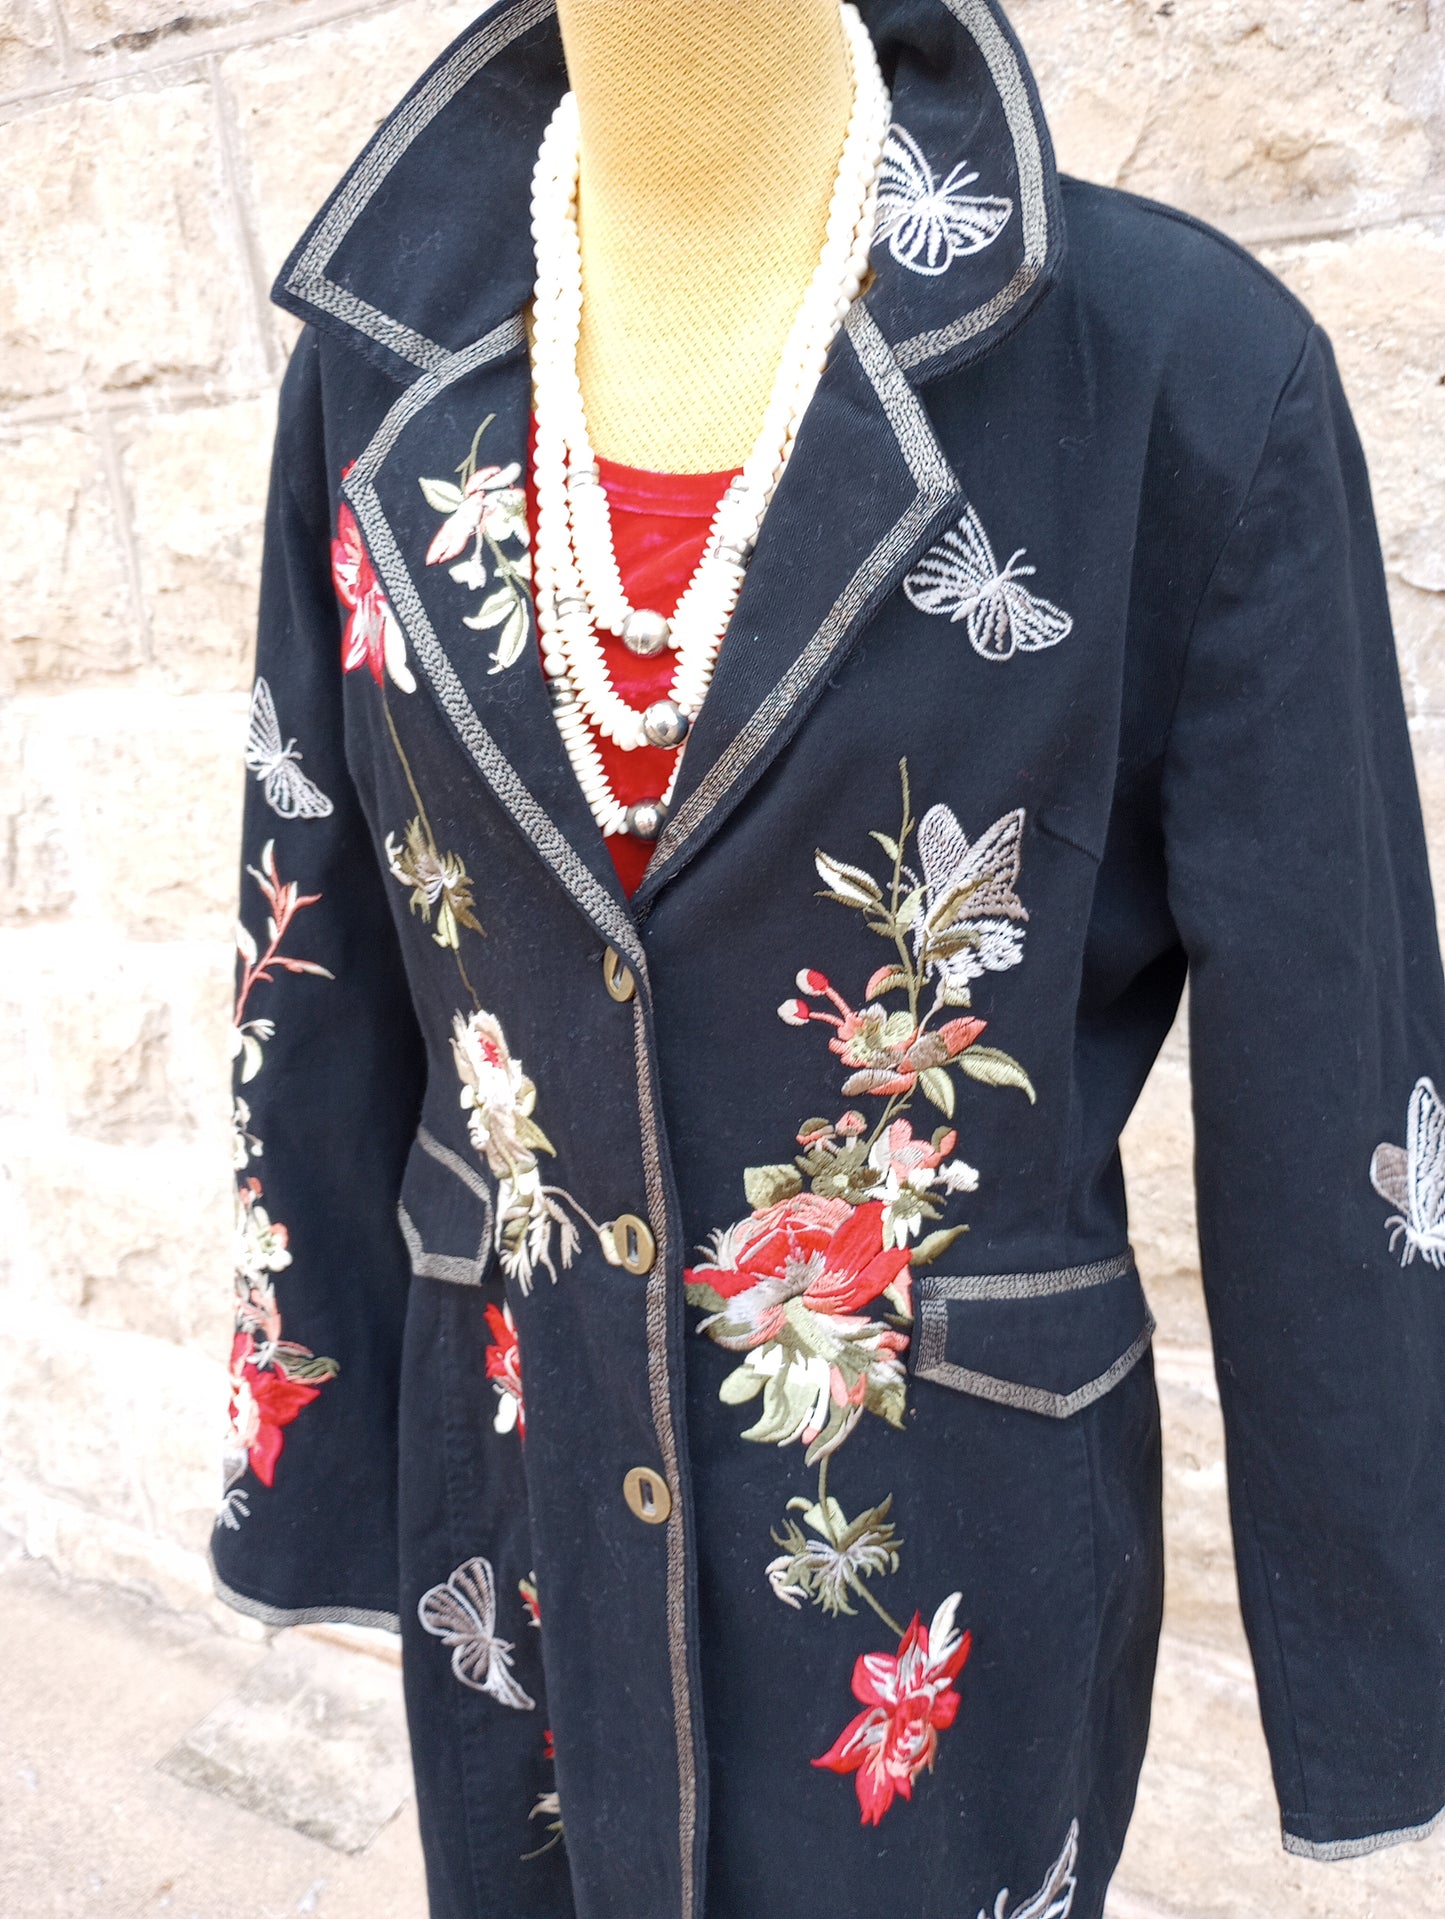 NWT heavily embroidered jacket